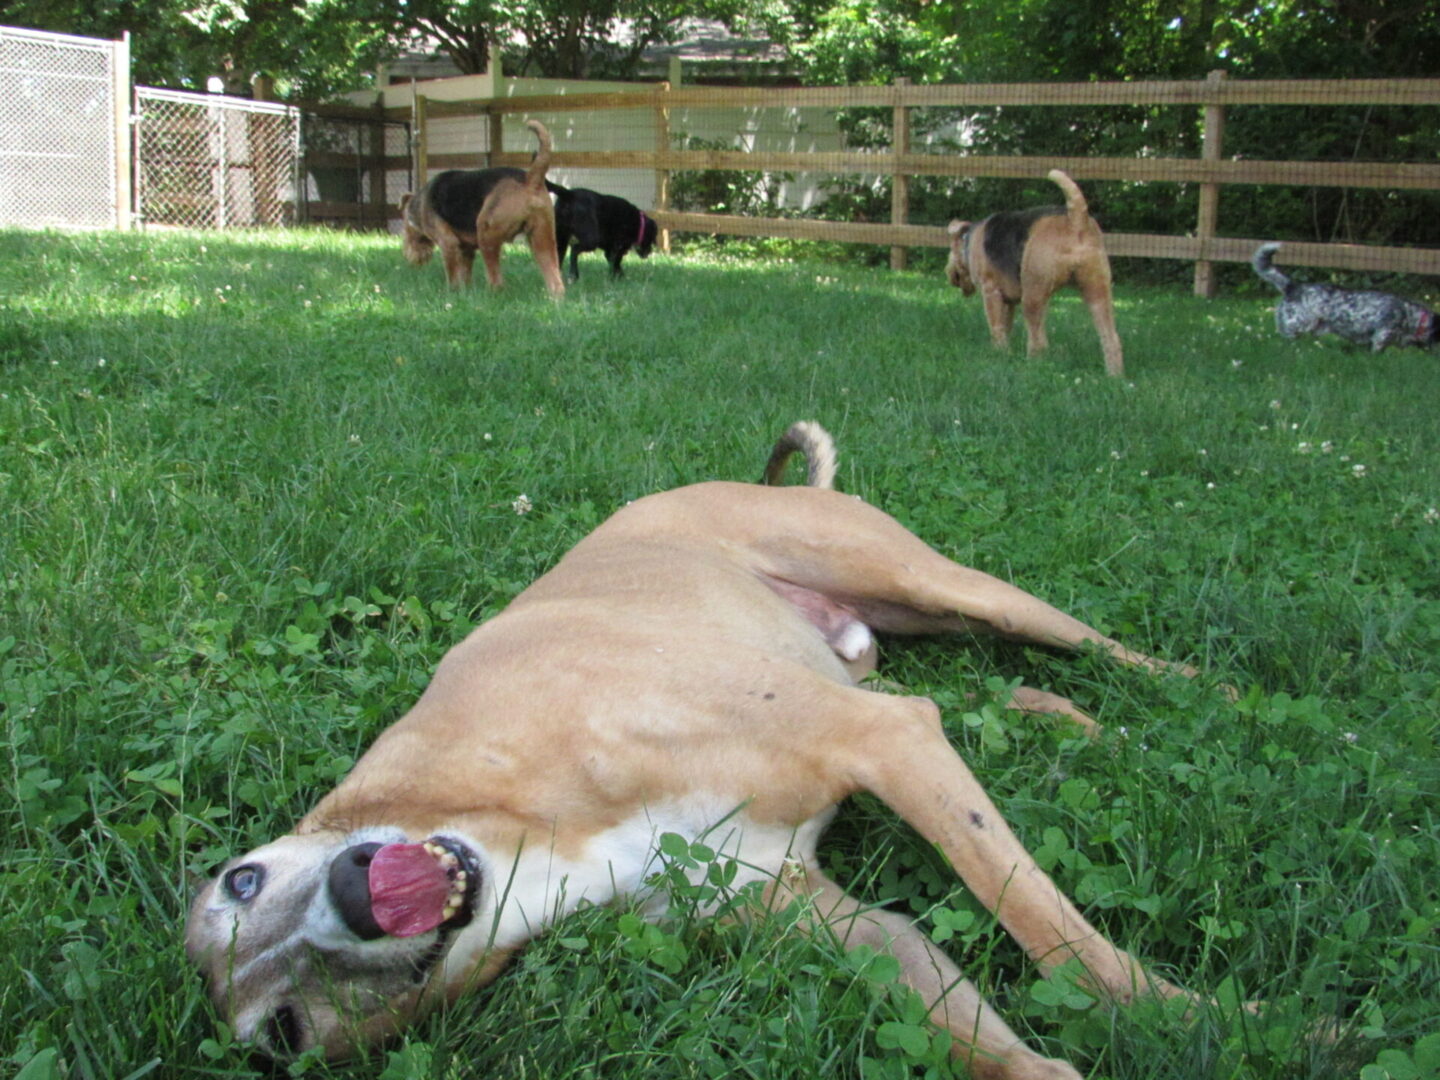 A dog laying on grass while licking its tongue